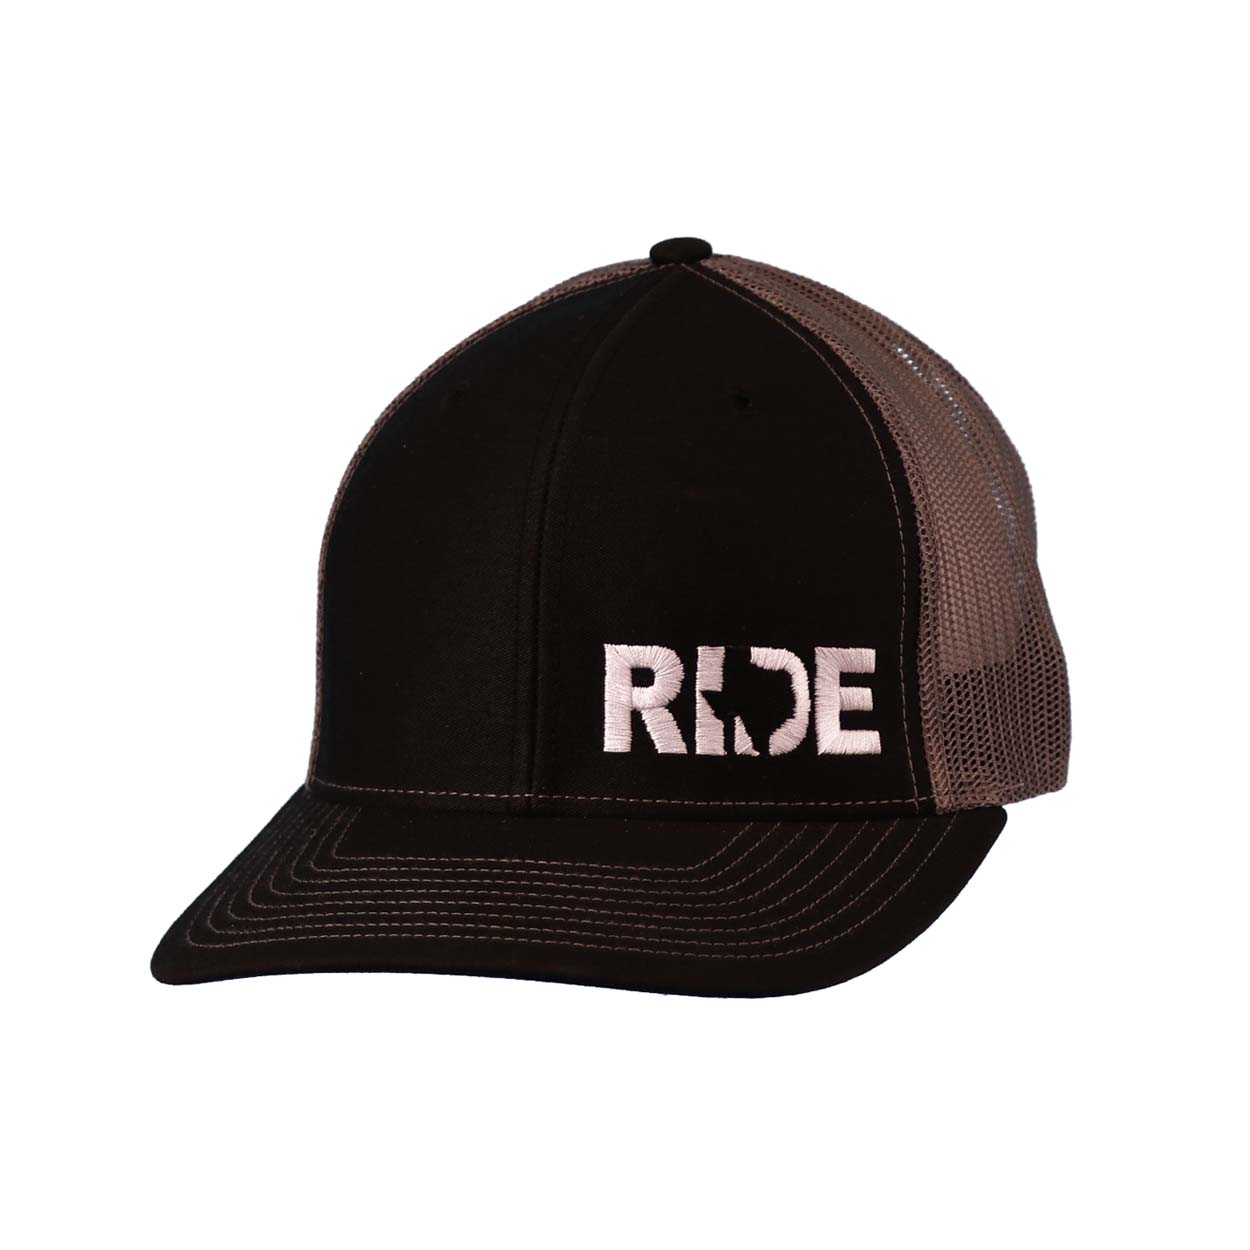 Ride Texas Night Out Embroidered Snapback Trucker Hat Black/Charcoal